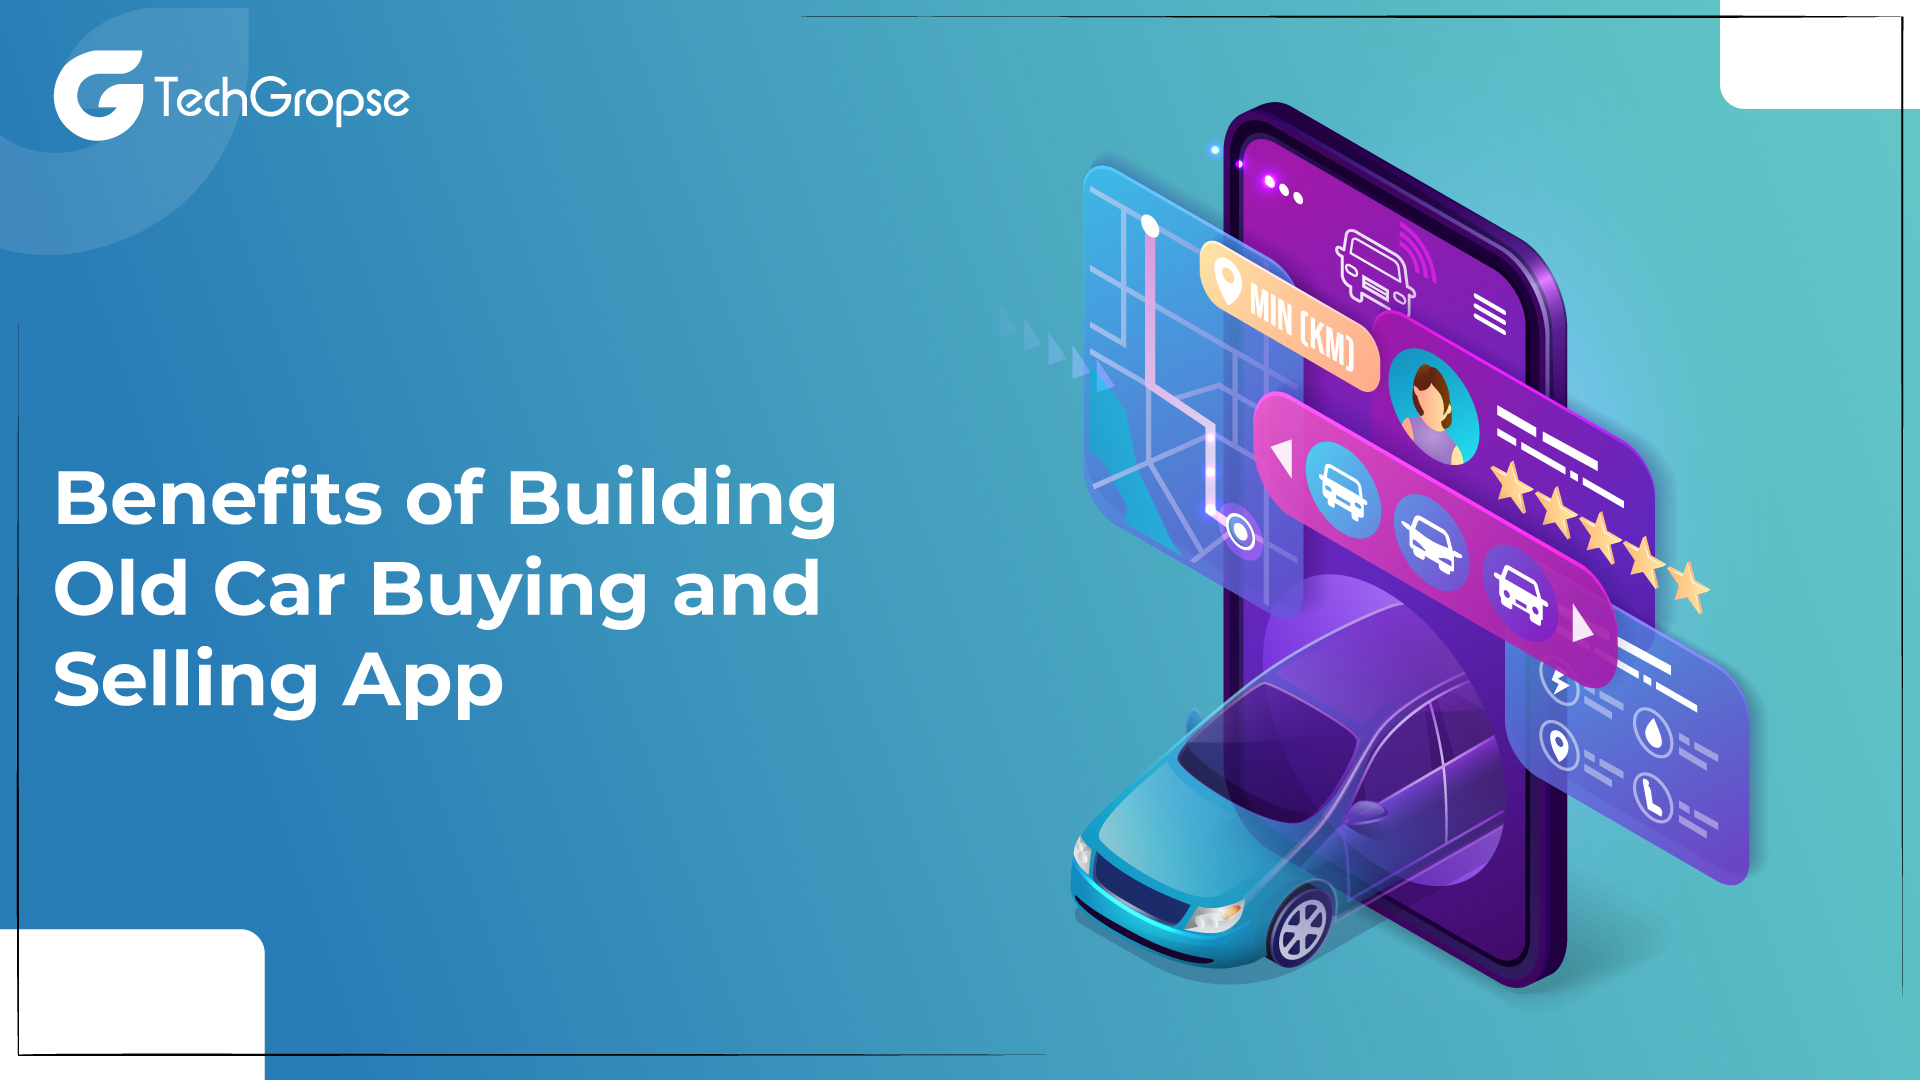 Benefits of Building Old Car Buying and Selling App